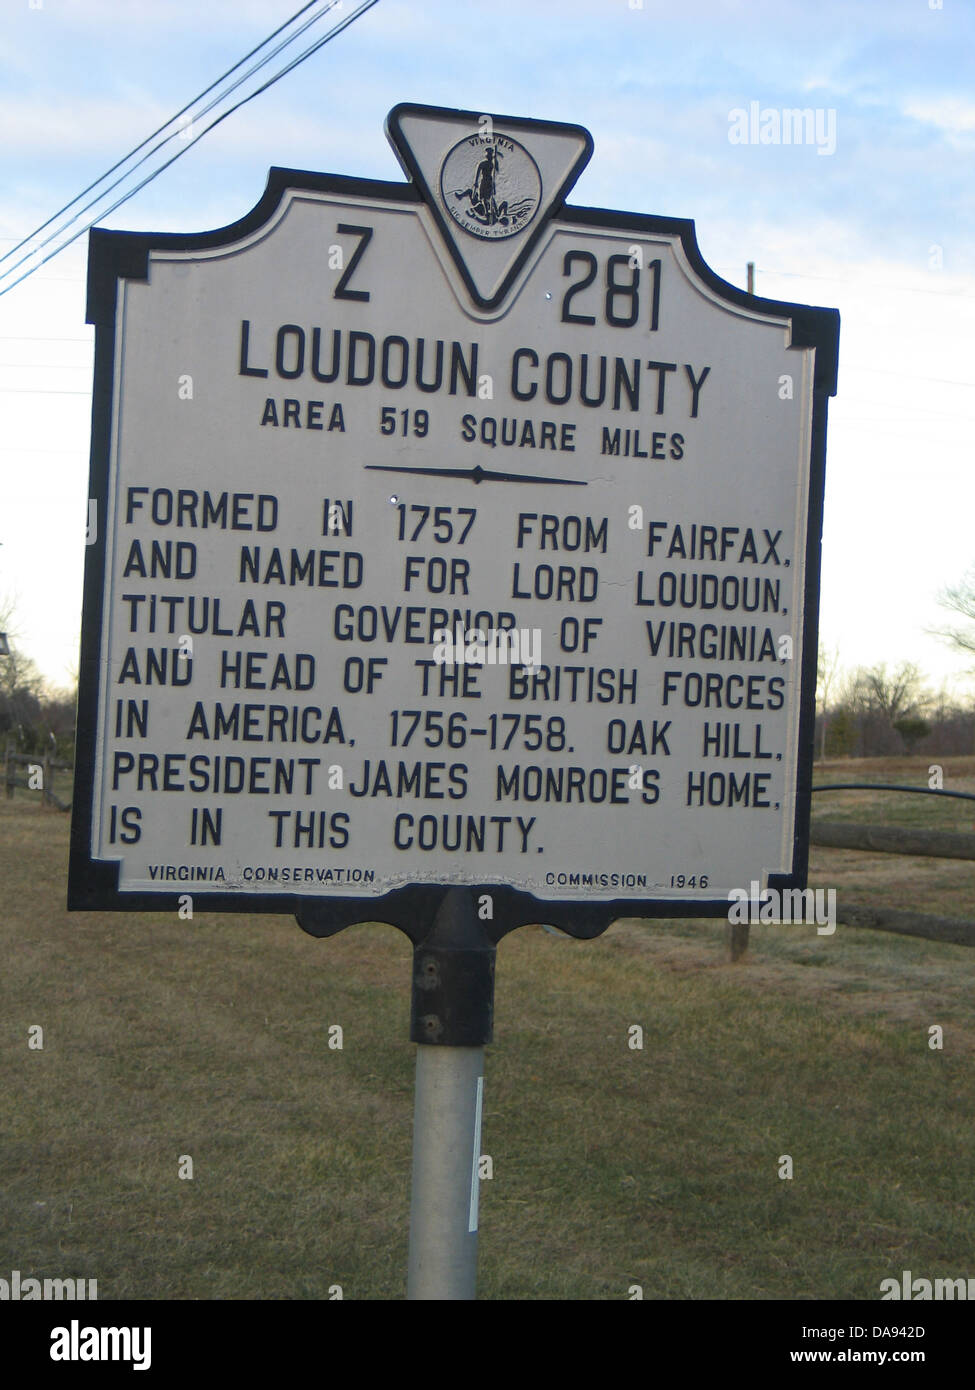 LOUDOUN COUNTY Area 519 Square Miles Formed in 1757 from Fairfax, and named for Lord Loudoun, titular governor of Virginia, and head of the British Forces in America 1756-1758. Oak Hill, President James Monroe's Home, is in this county Virginia Conservation Commission, 1946 Stock Photo